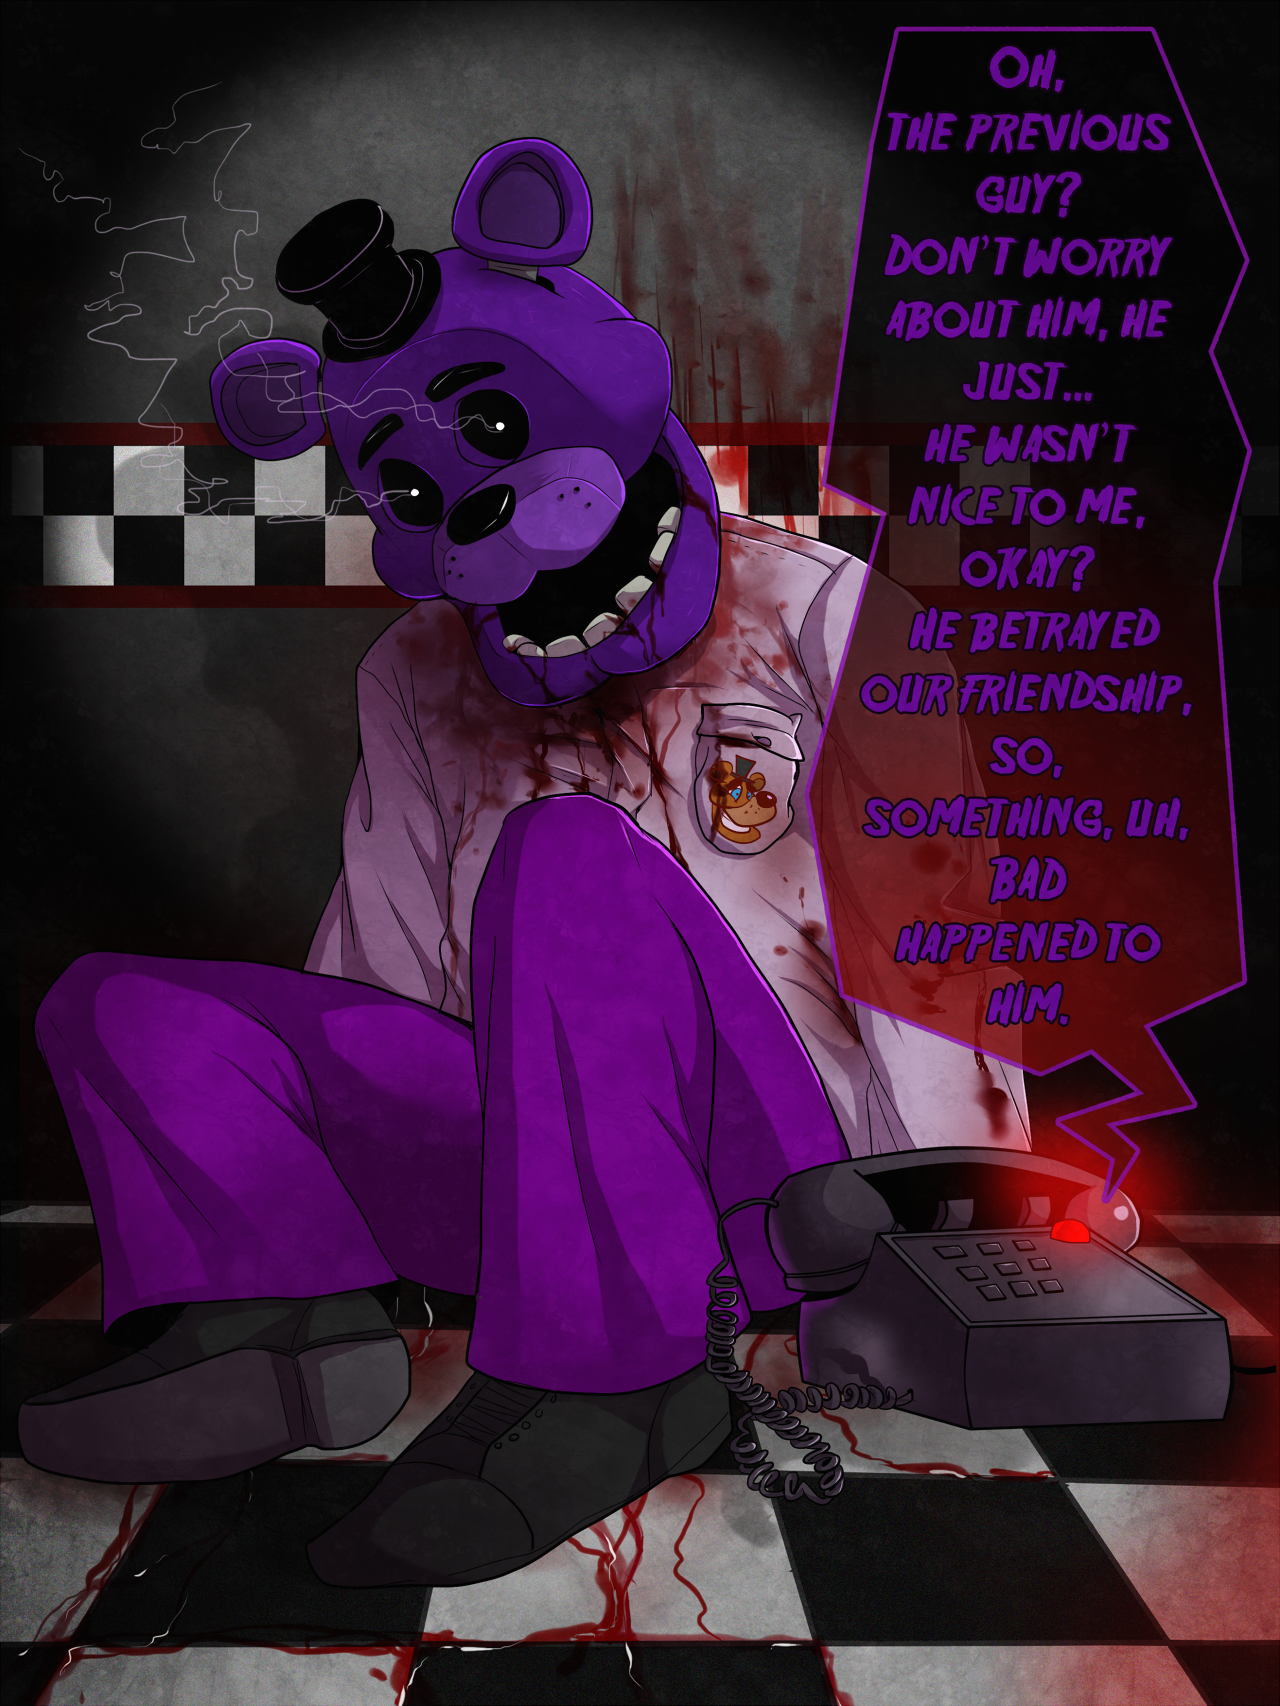 Mobile FNaF World - We Did It, Guys! by FreddleFrooby on DeviantArt